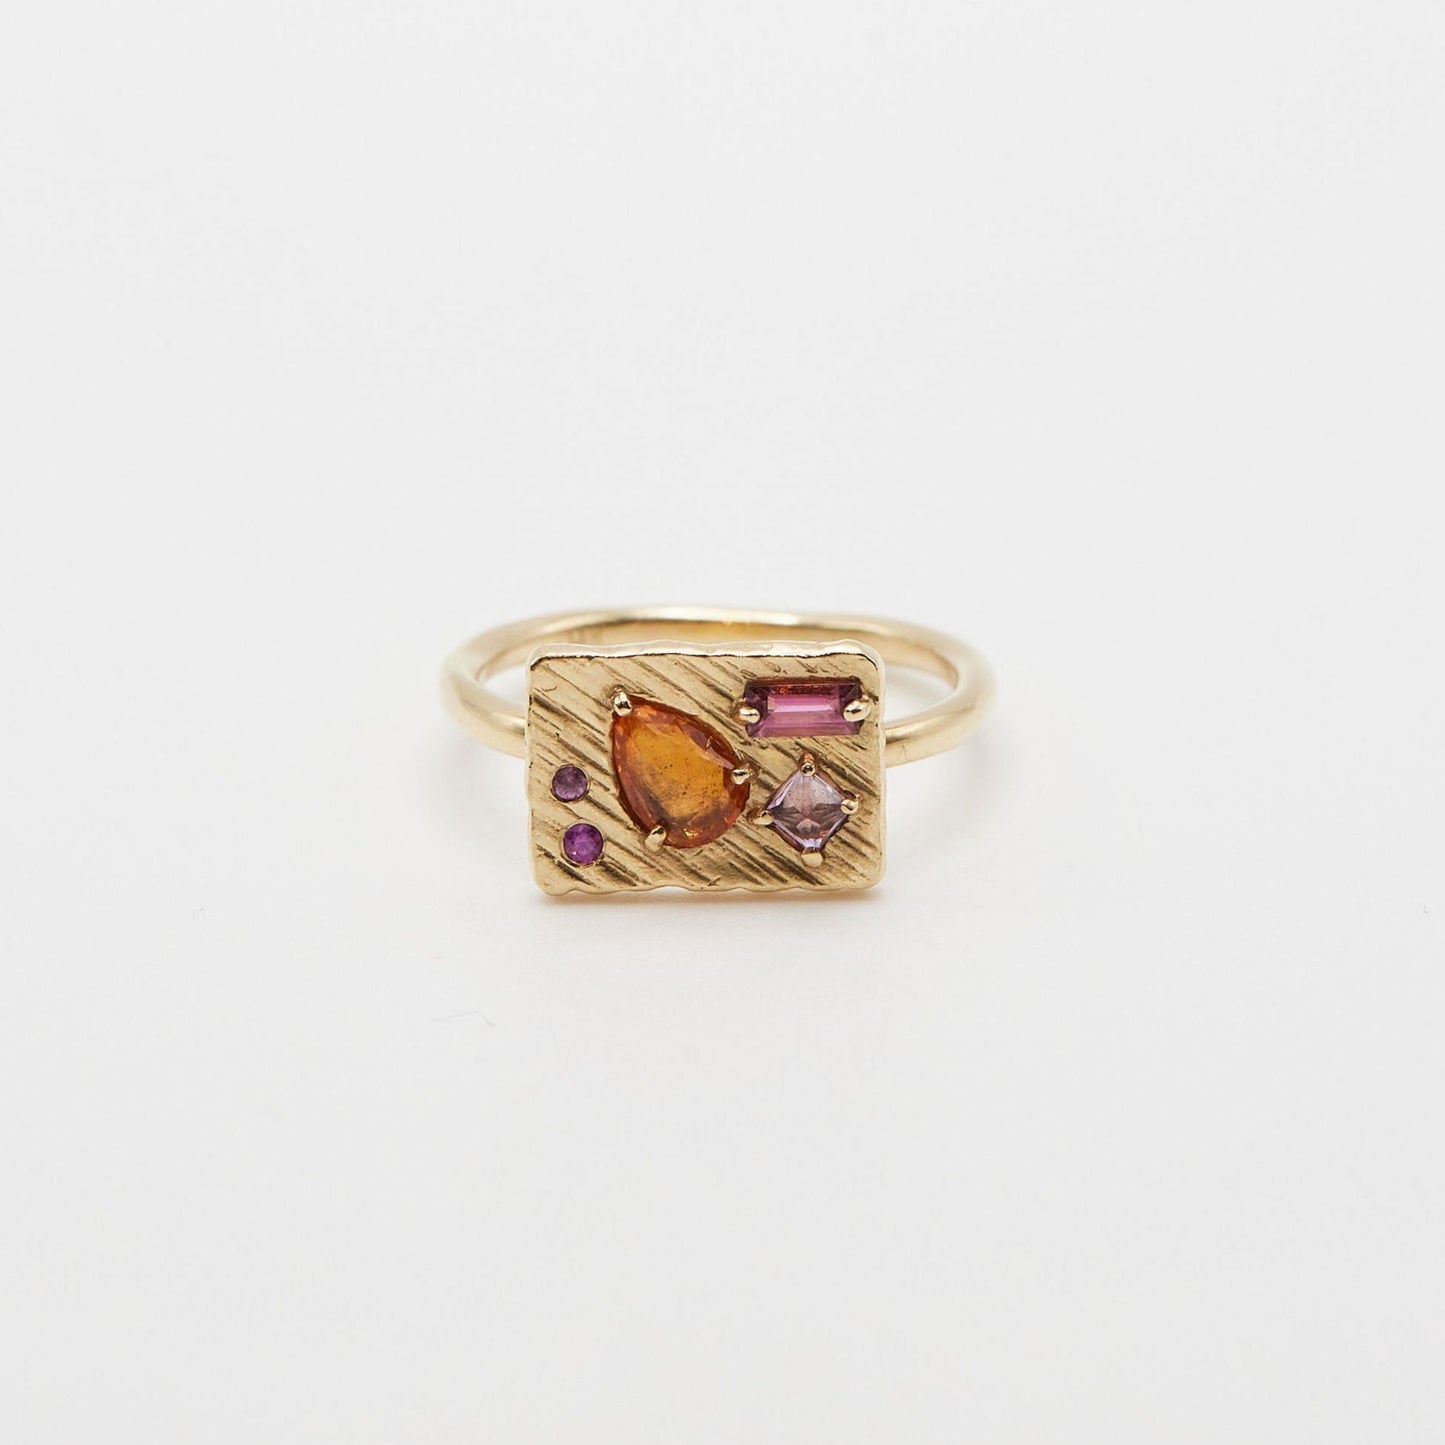 Load image into Gallery viewer, rectangle shaped gold ring with orange pear shaped stone, rectangle pink stone, and three round pink stones on white background
